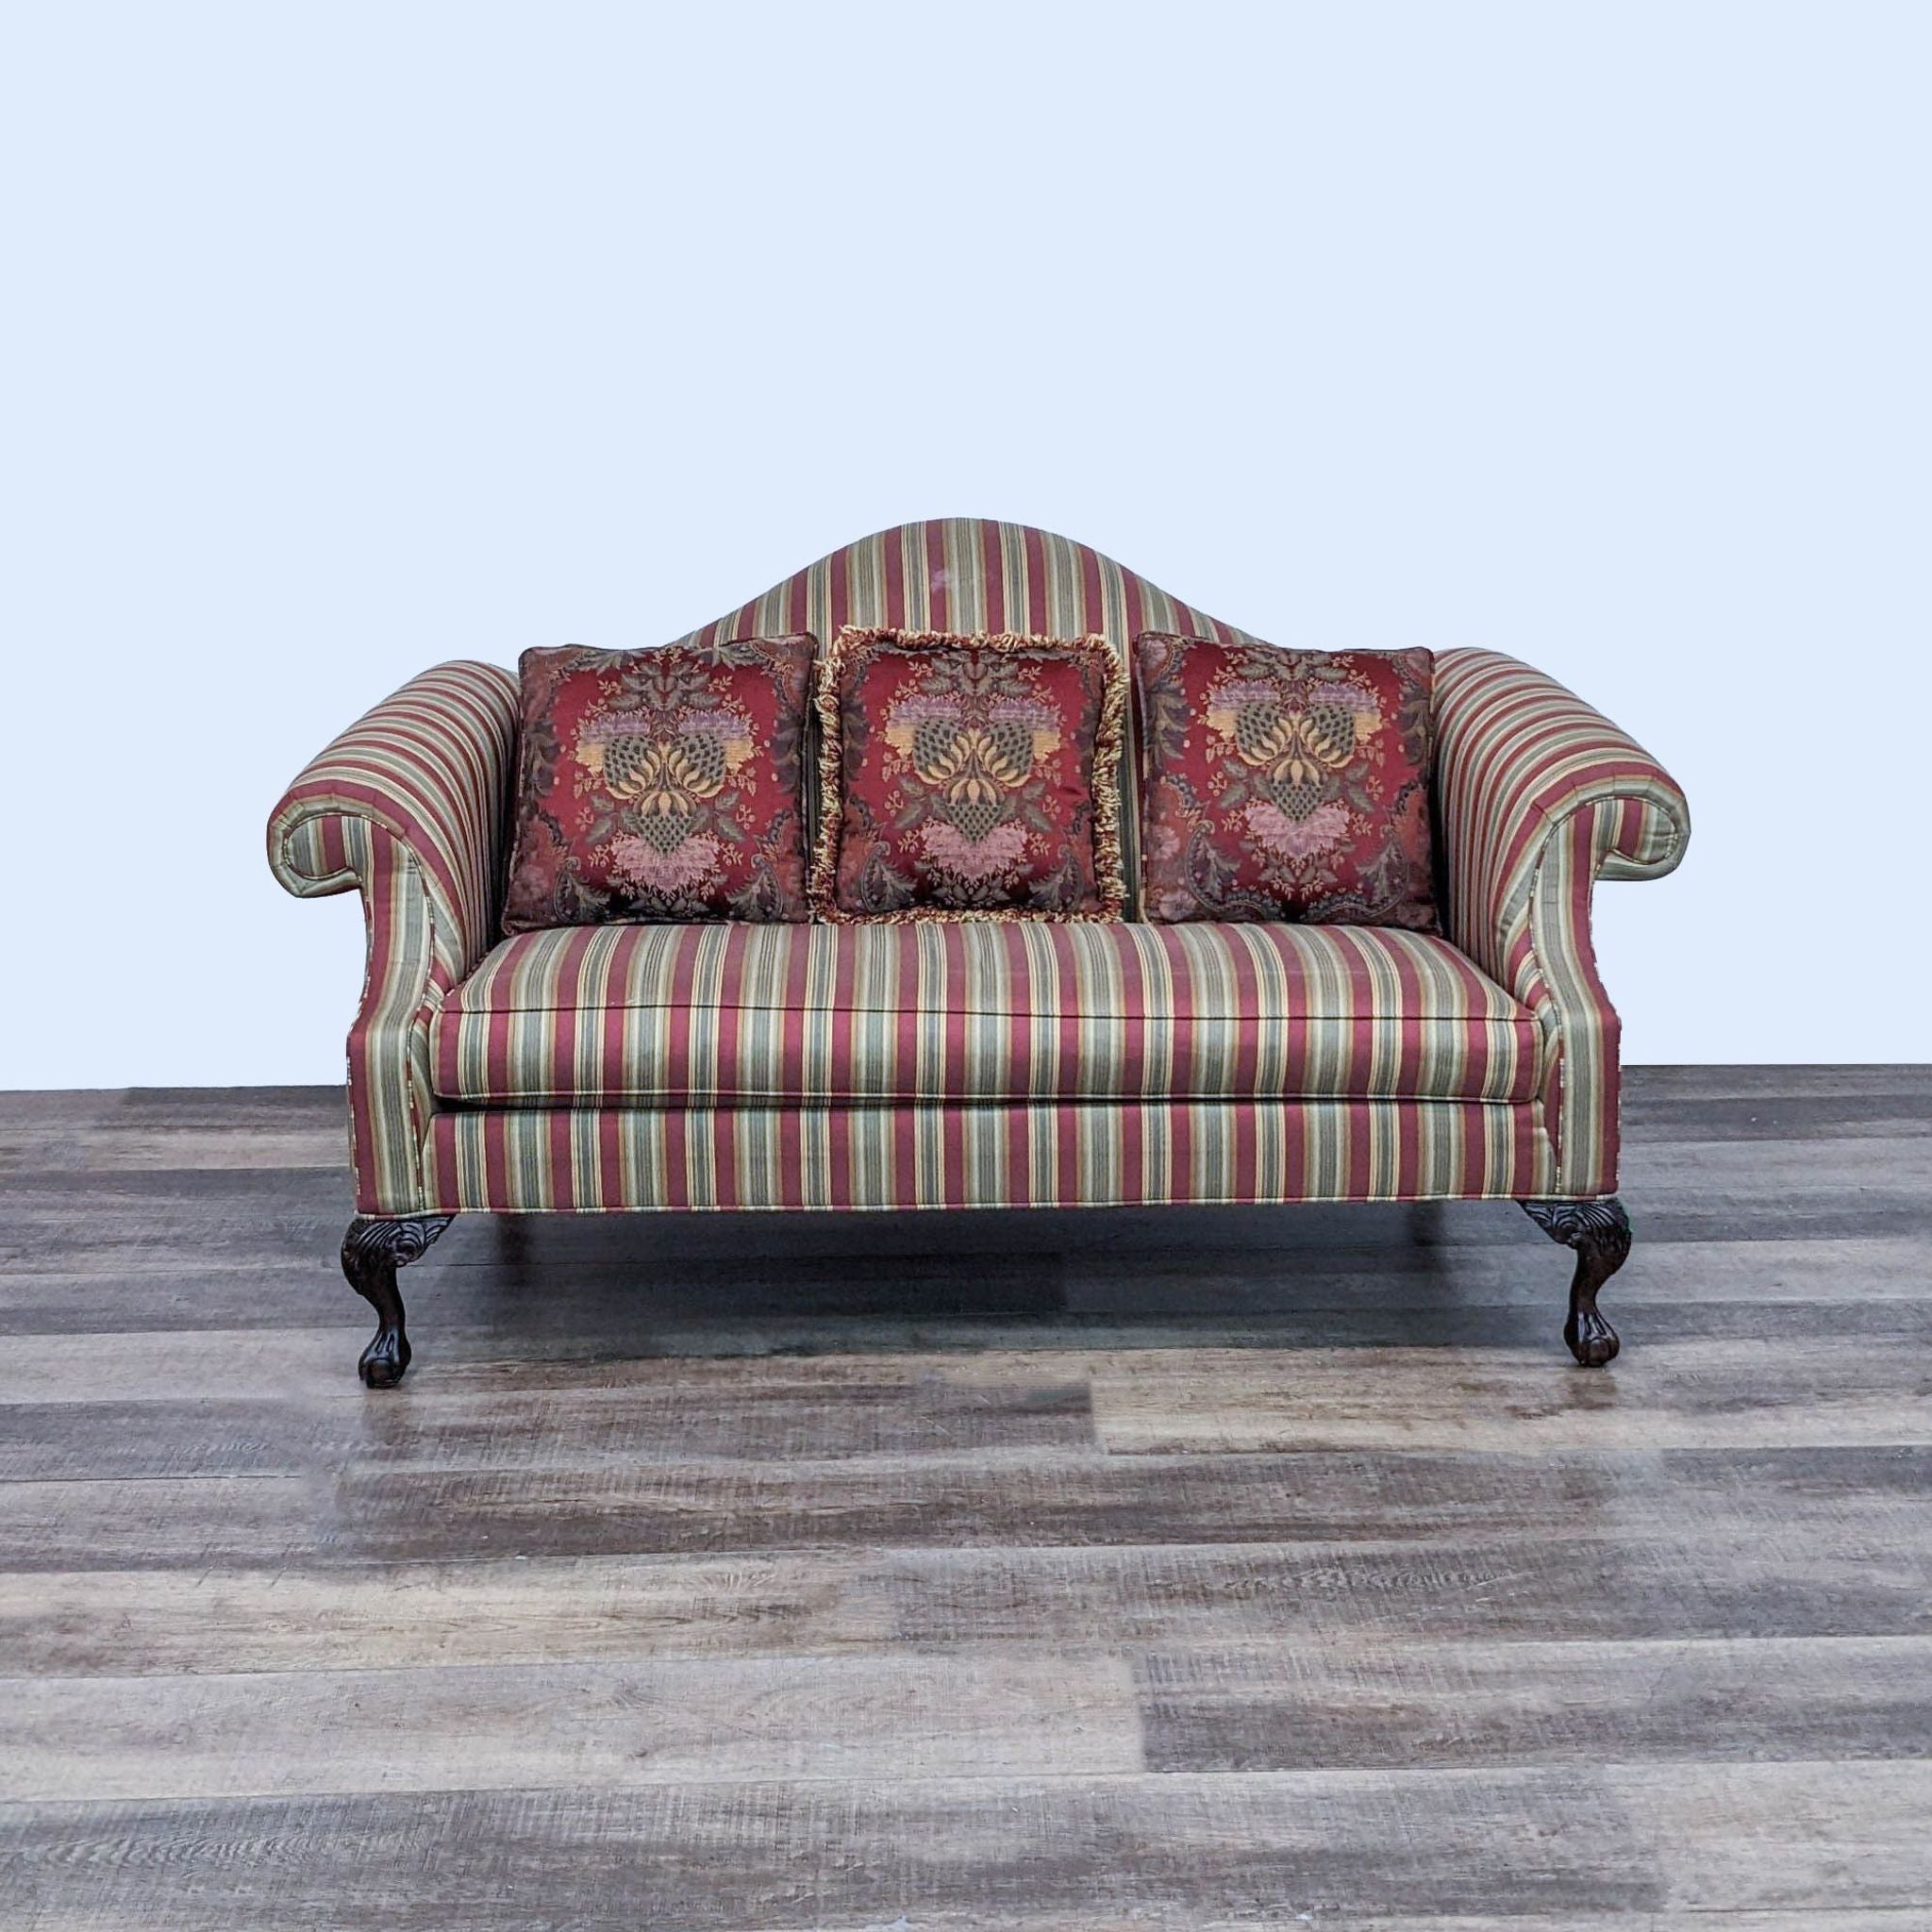 Ethan Allen traditional striped fabric loveseat with Queen Anne silhouette, Chippendale feet, and three ornate pillows.